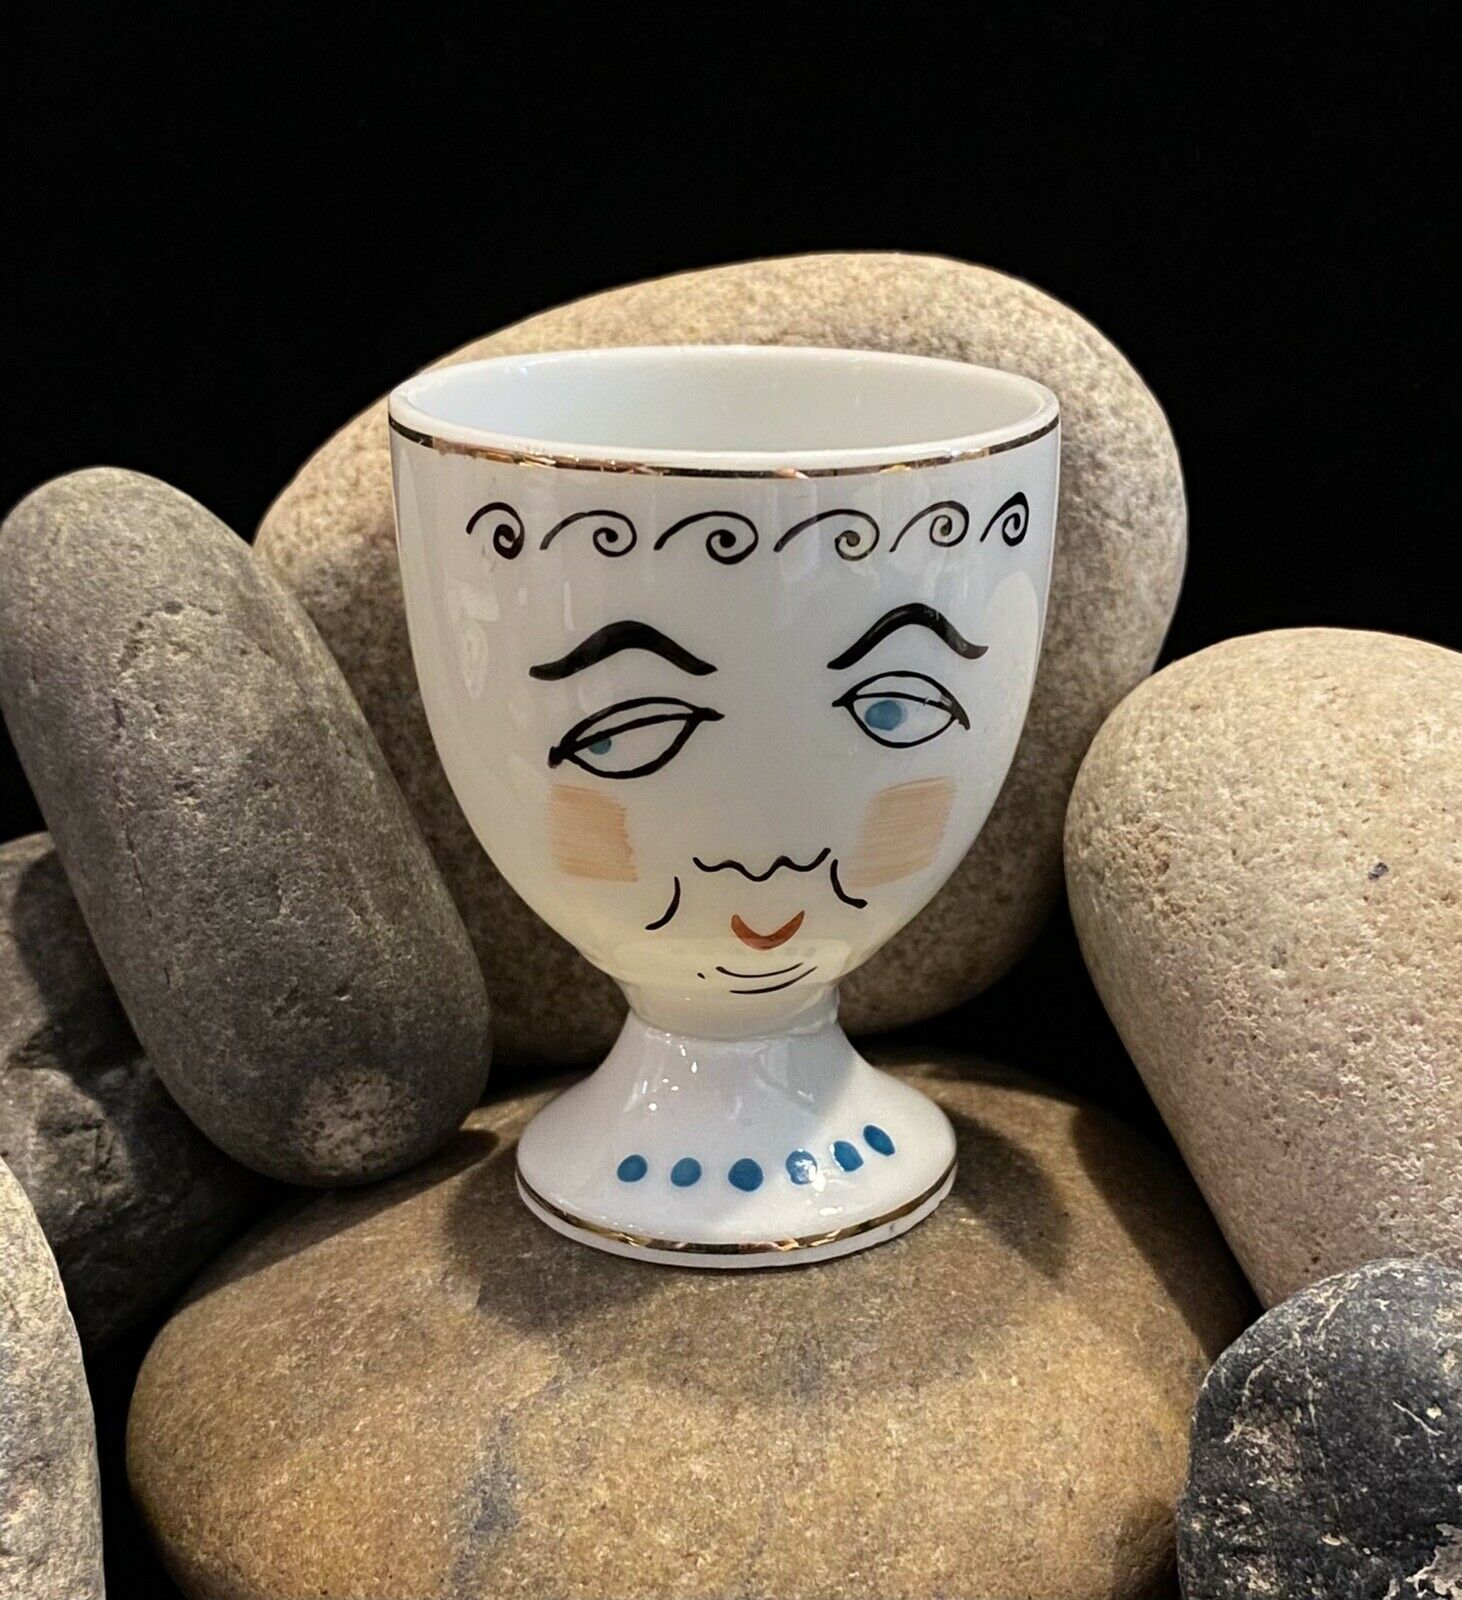 Vintage Whimsical Face Egg Cup from Japan